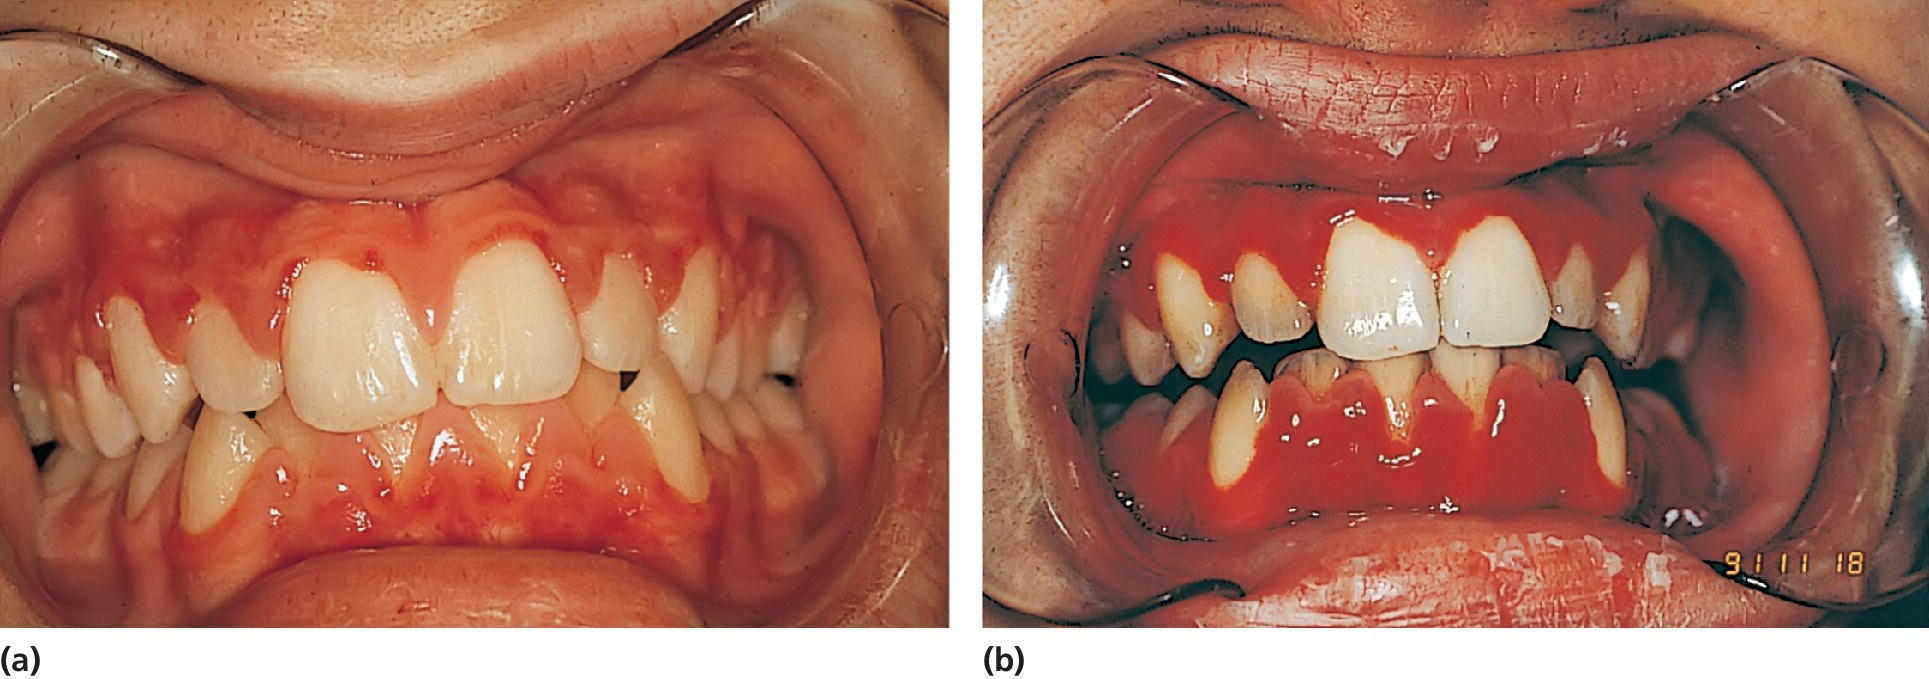 Left: Photo of a 15‐year‐old boy with aplastic anemia prescribed cyclosporine medication. Right: Photo of an 18-year-old boy with deteriorating gingival health coincidental with a hematological crisis.